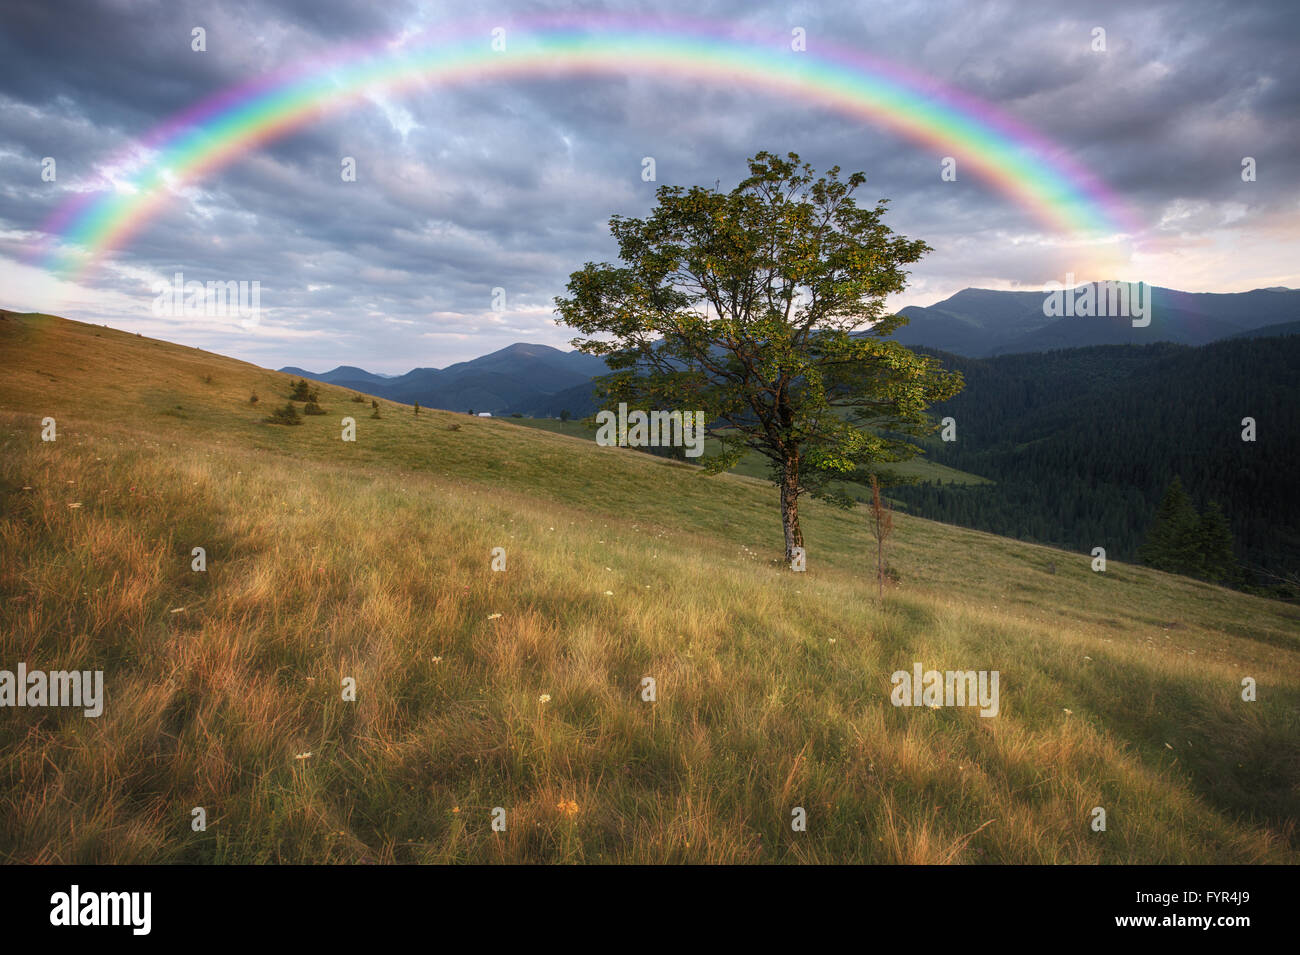 Mountains rural landscape and rainbow Stock Photo